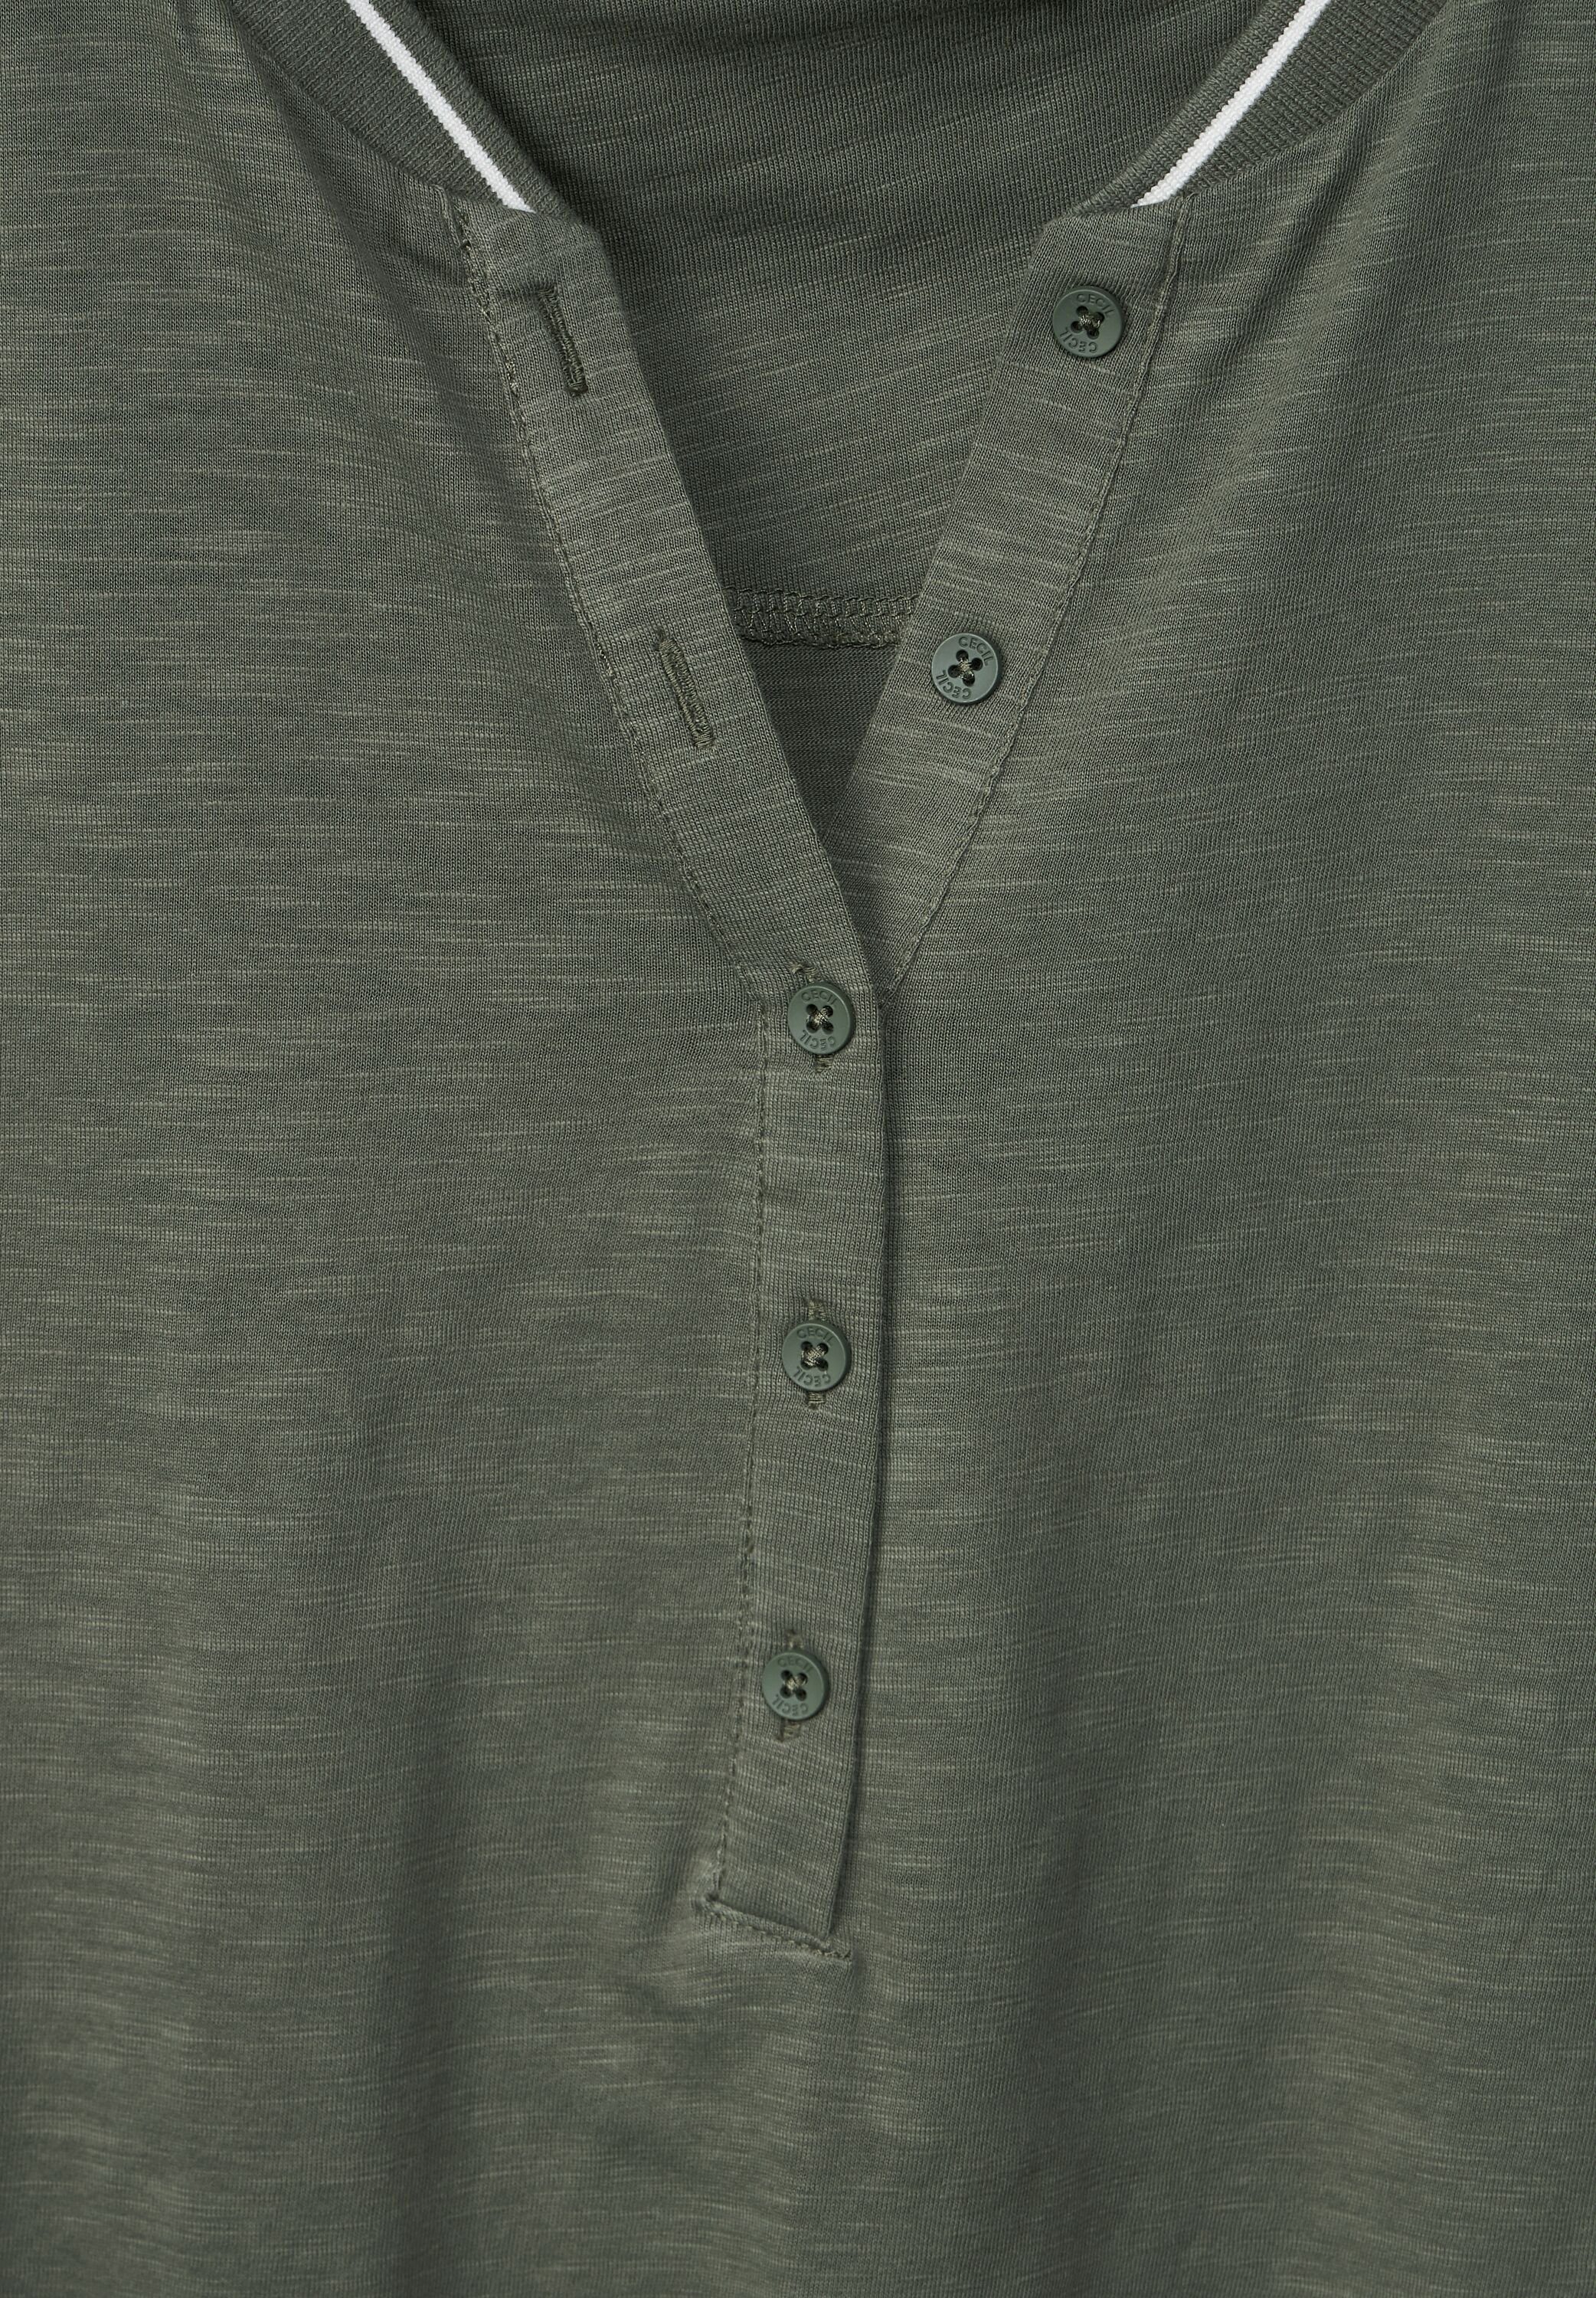 Cecil 3/4-Arm-Shirt in Unifarbe desert olive green